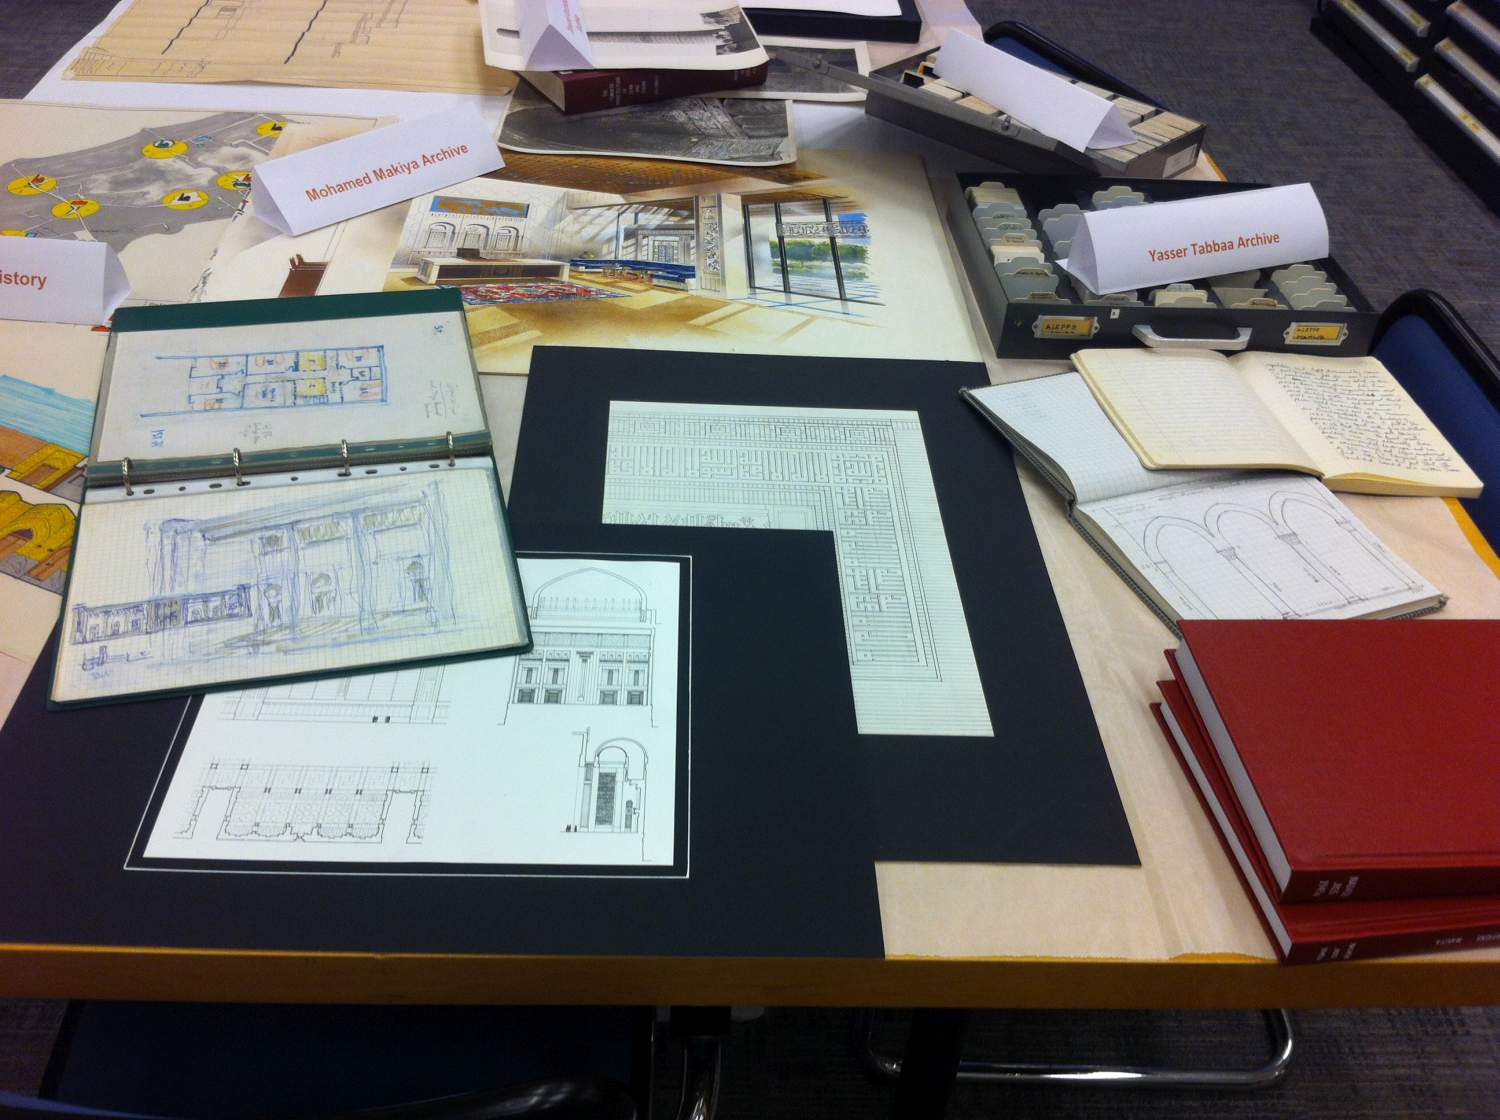 Mohamed Makiya Archive drawings, sketches, and interior design watercolor study (center 3 items), and Yasser Tabbaa Archive notebooks and slides at middle right (above red special collection volumes)